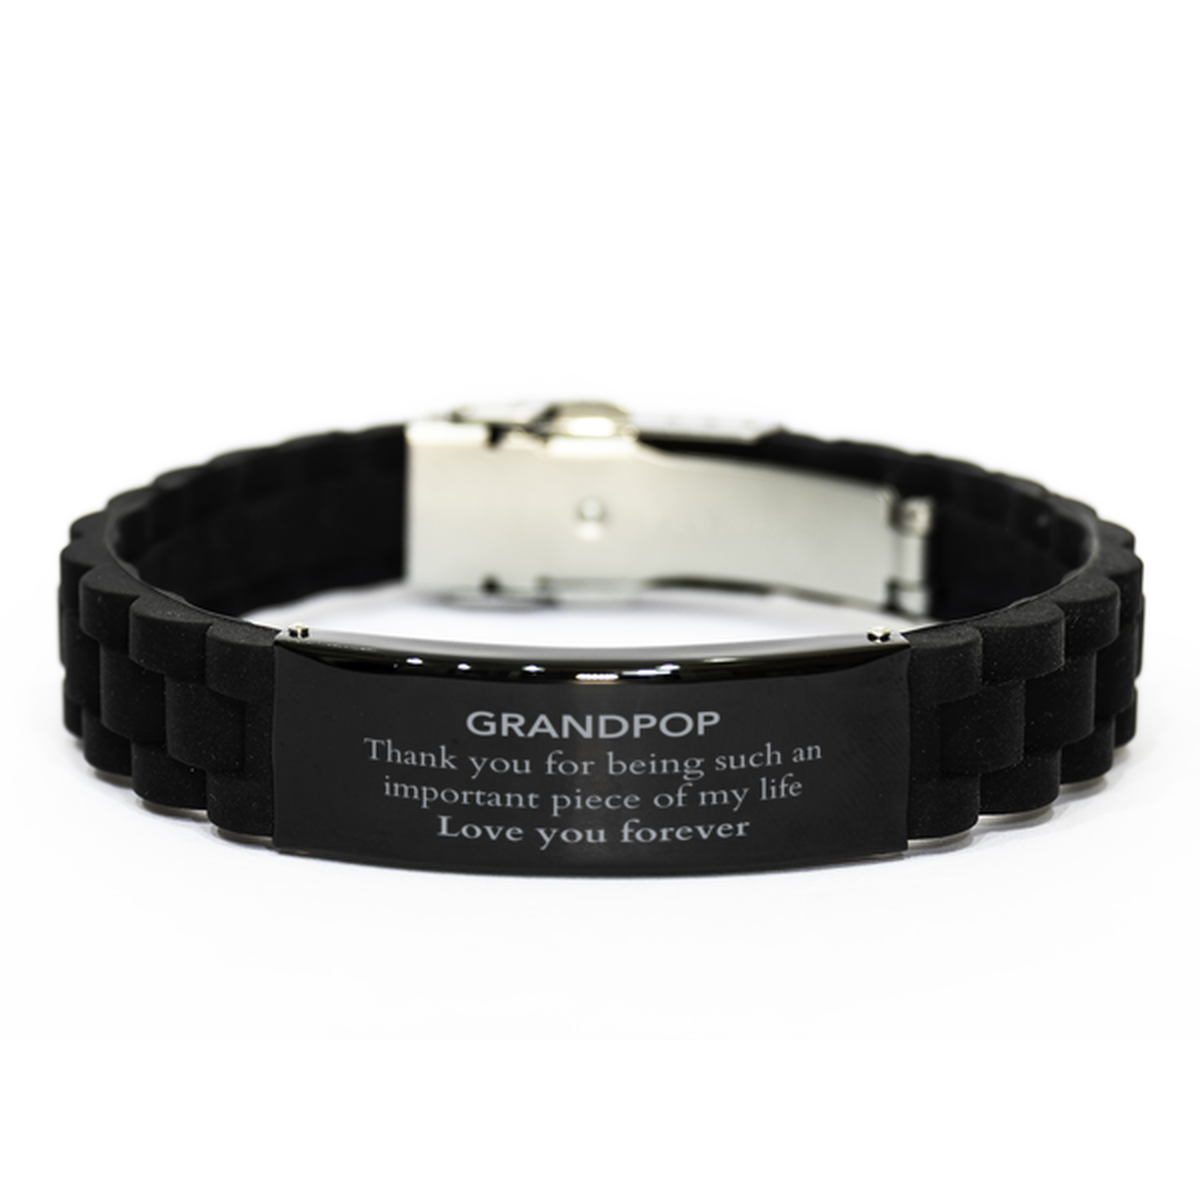 Appropriate Grandpop Black Glidelock Clasp Bracelet Epic Birthday Gifts for Grandpop Thank you for being such an important piece of my life Grandpop Christmas Mothers Fathers Day